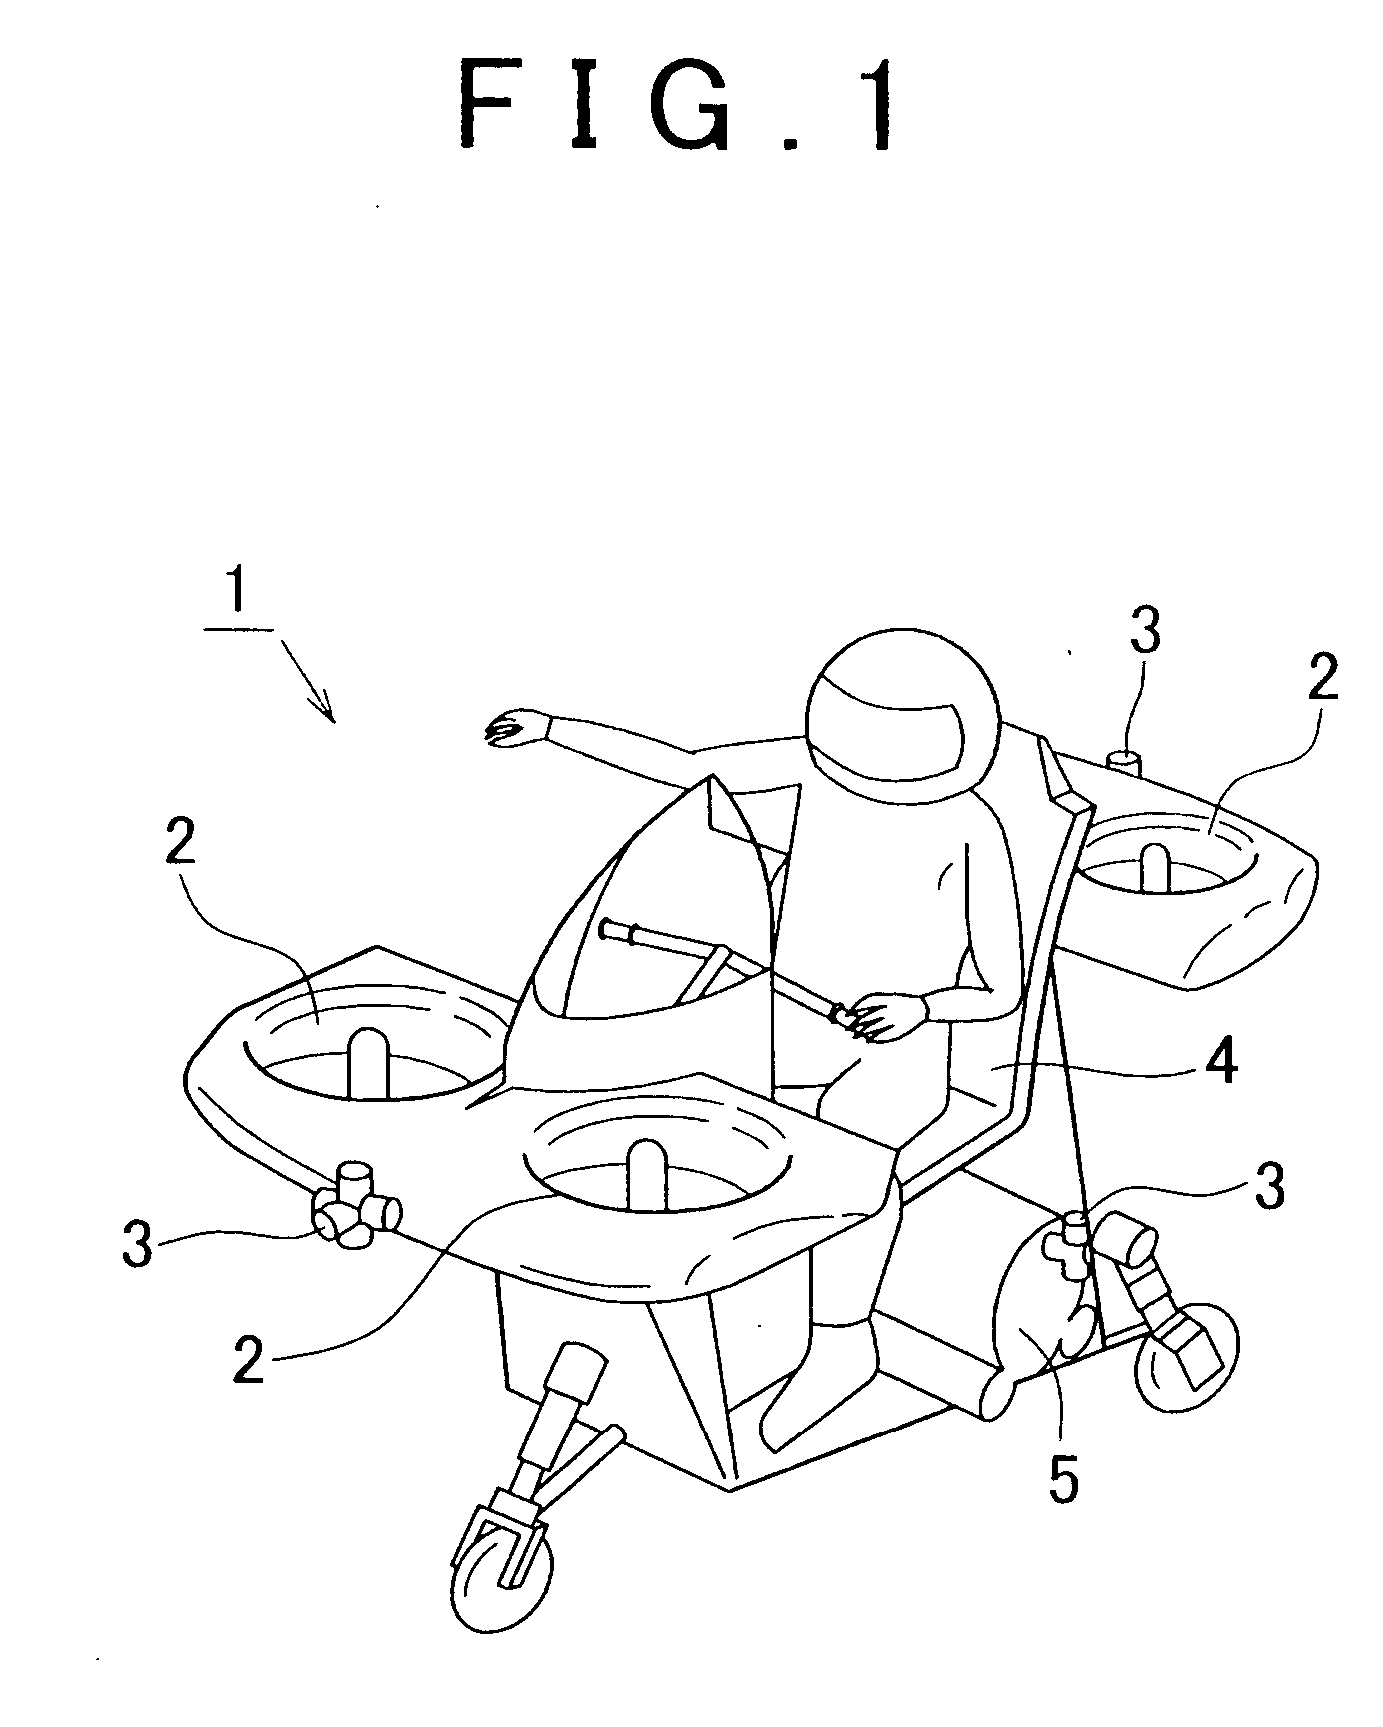 Control apparatus and control method for aircraft